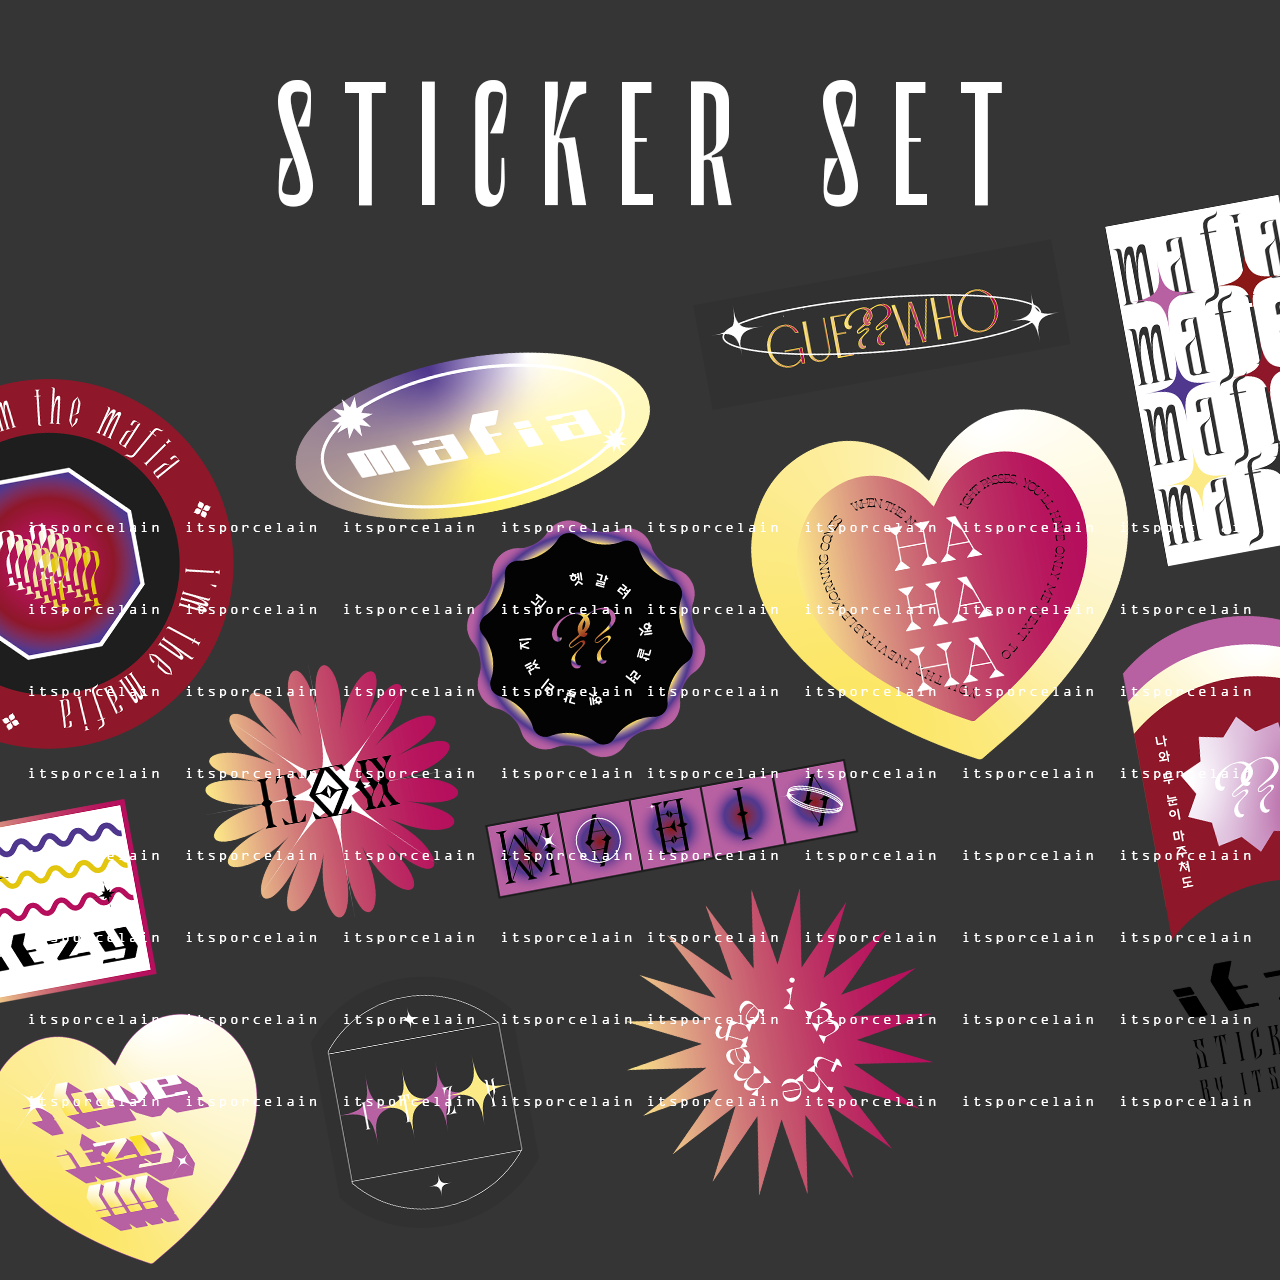 200+ Y2K STICKERS BUNDLE  PNG PACK by chimiyaa on DeviantArt